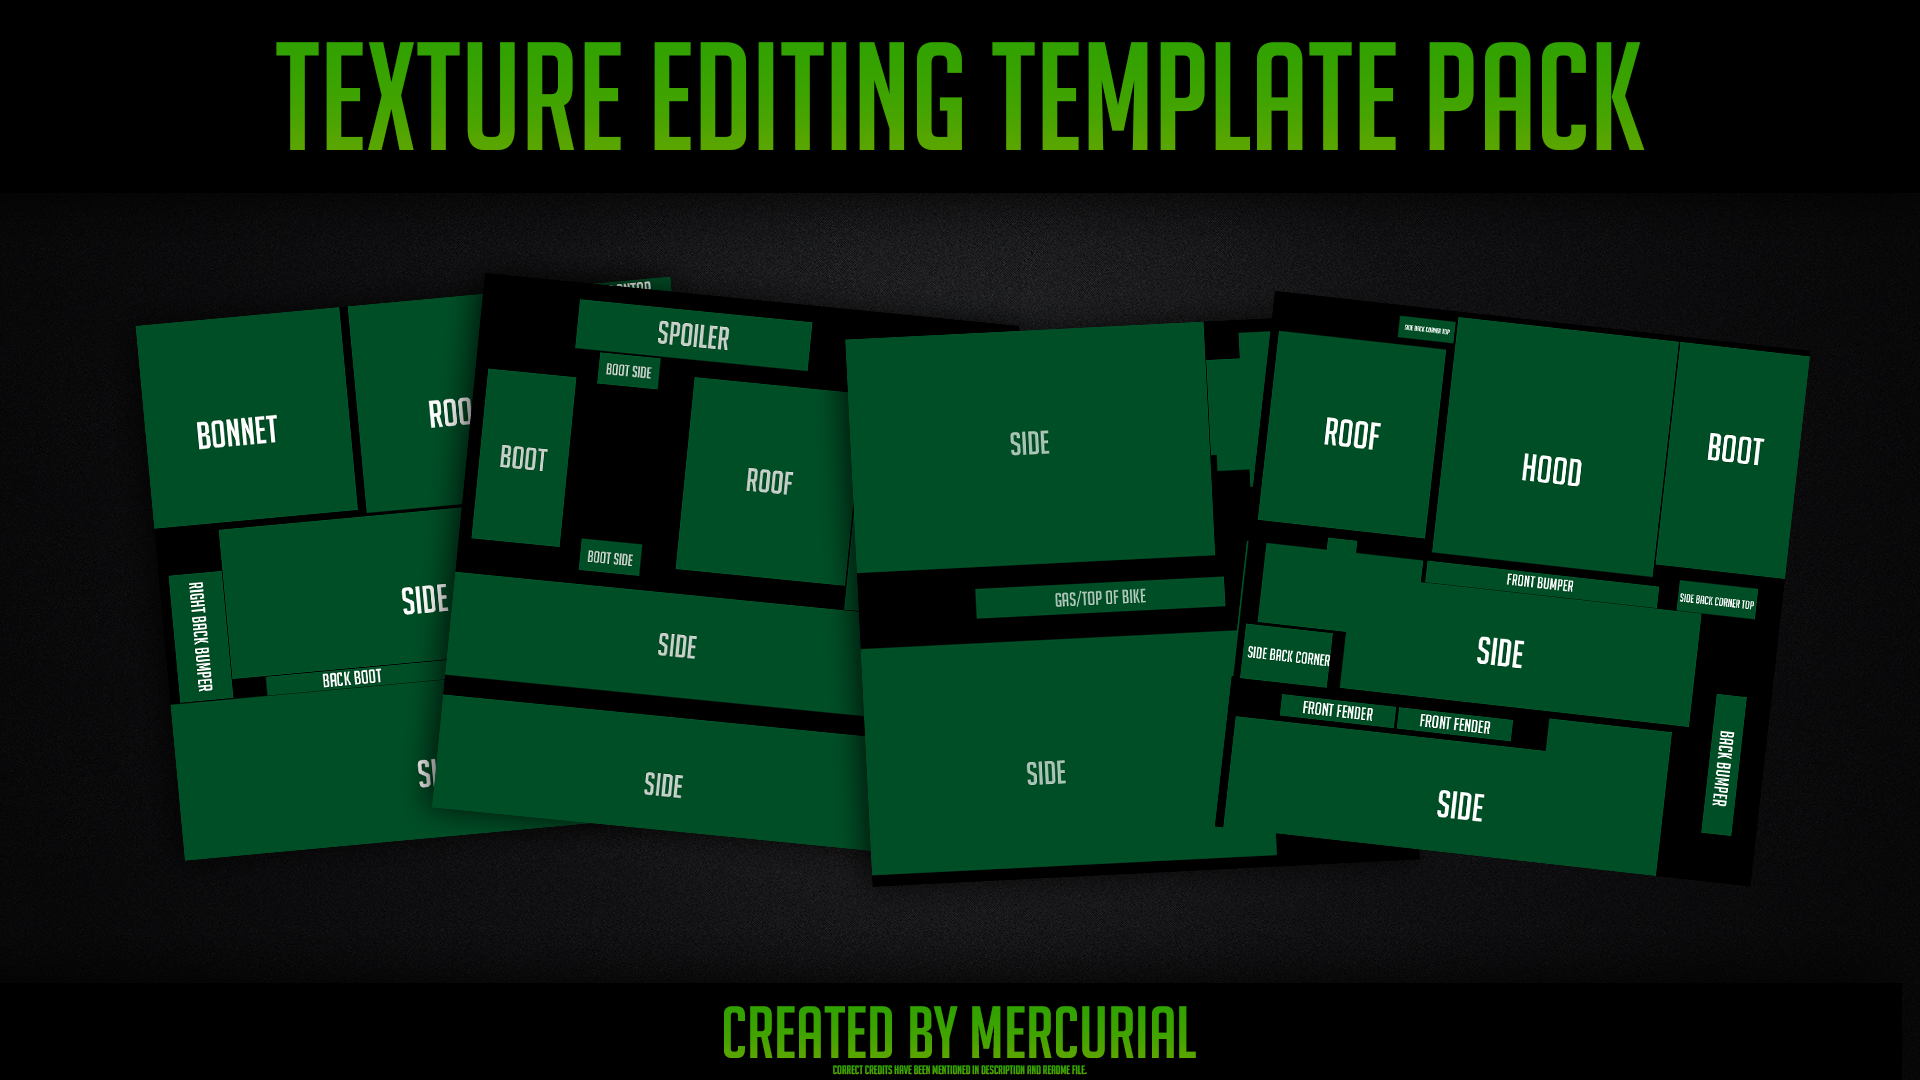 Texture Editing Template Pack